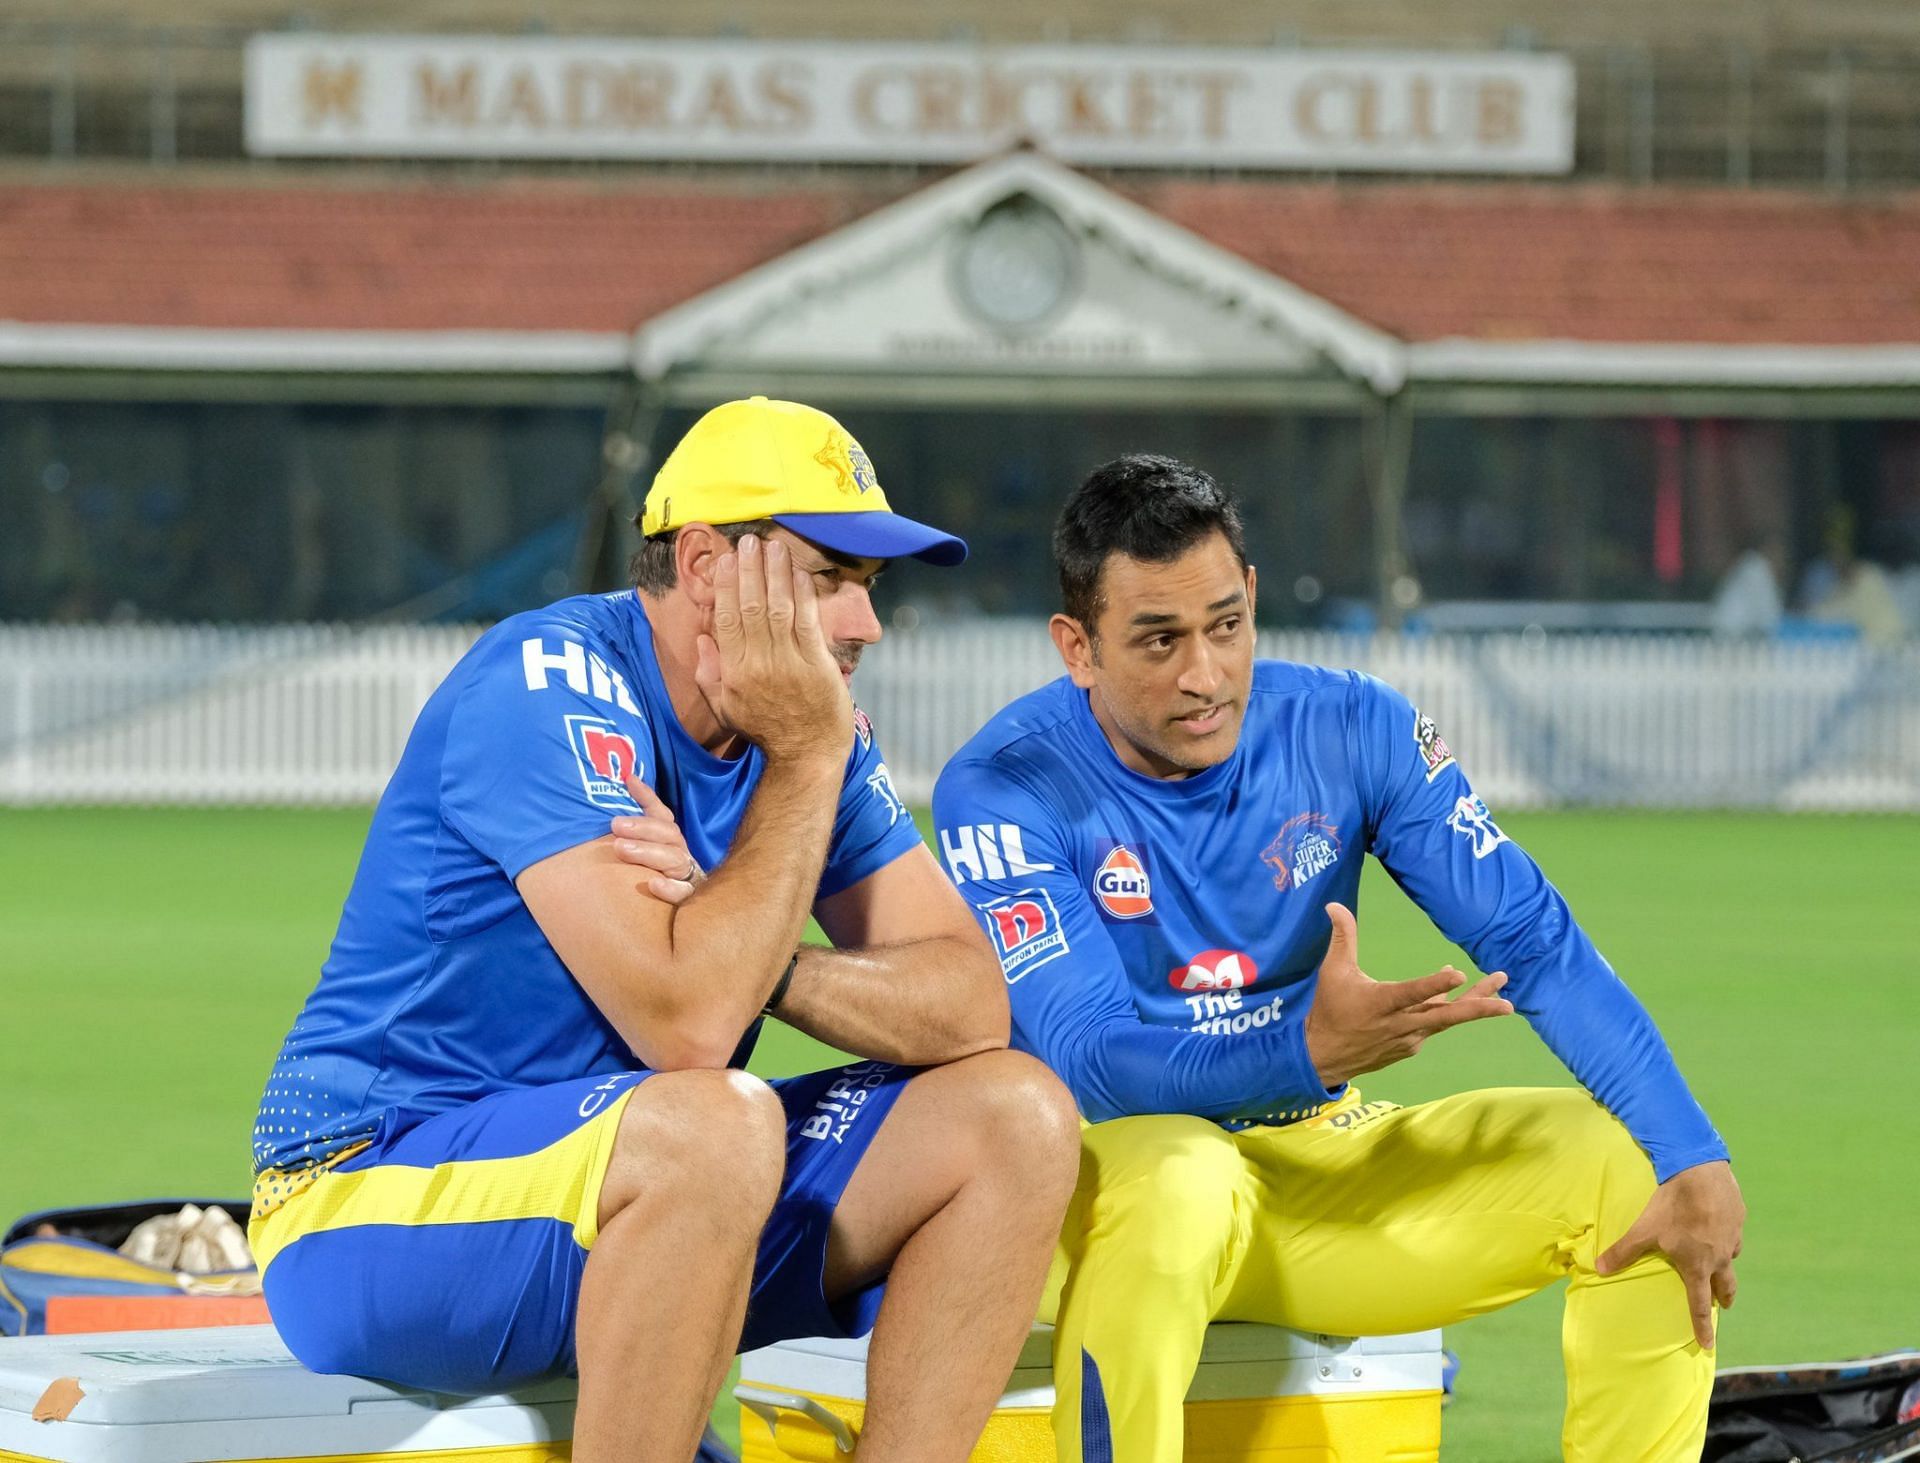 Stephen Fleming and MS Dhoni. (Image Credits: Twitter)